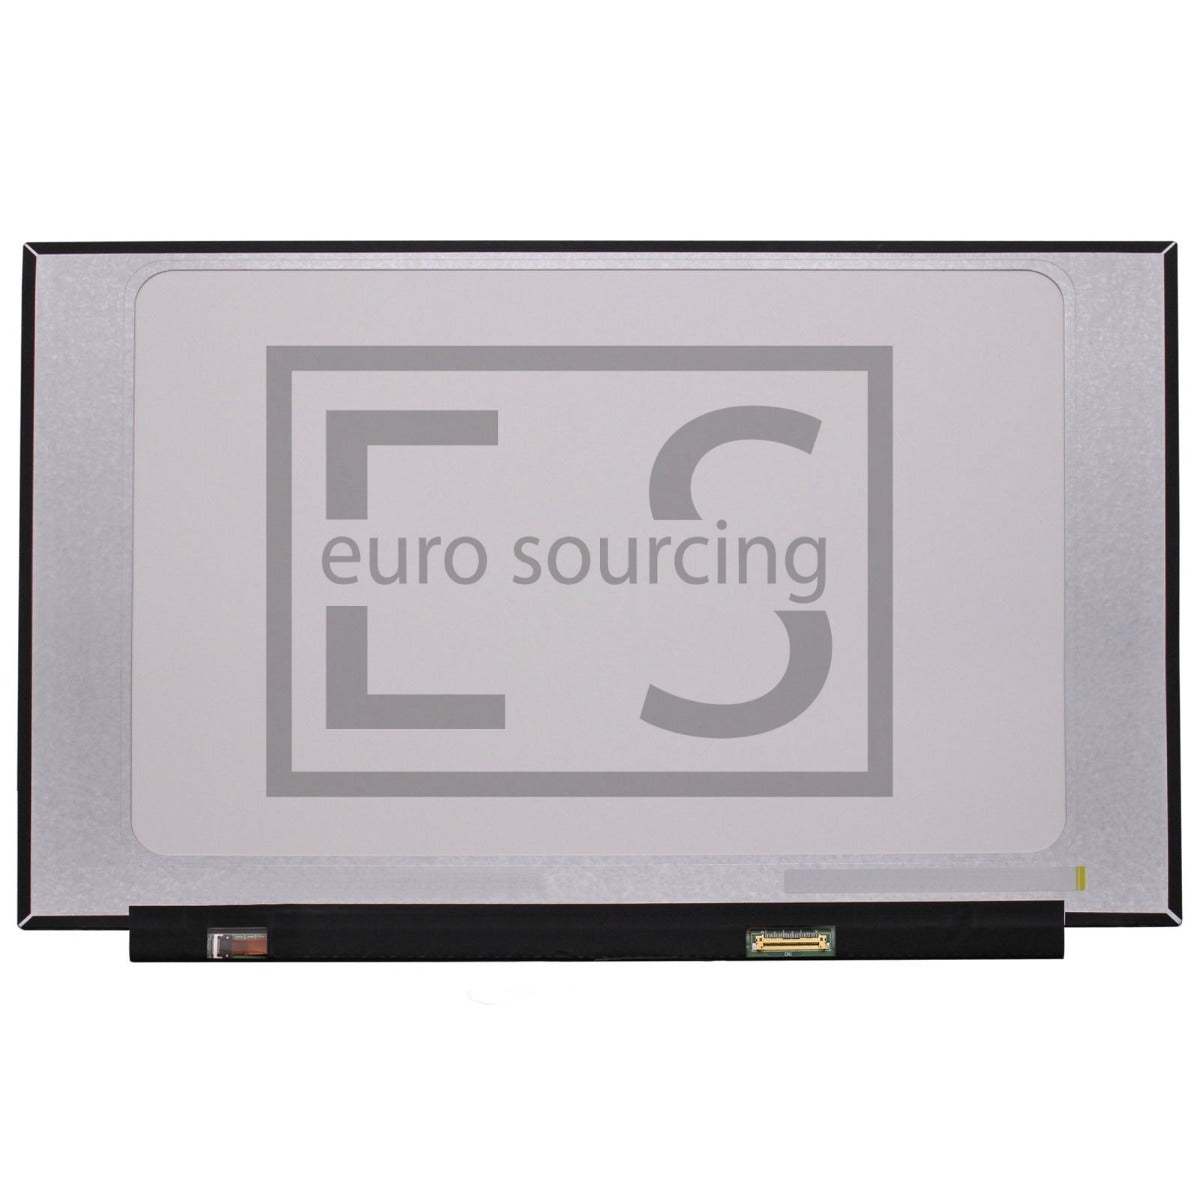 New Replacement For B156HAN02,1 15.6" LED LCD Screen Matte Display FHD IPS 350 MM - Without Brackets  Compatible With MSI GE62 6QD